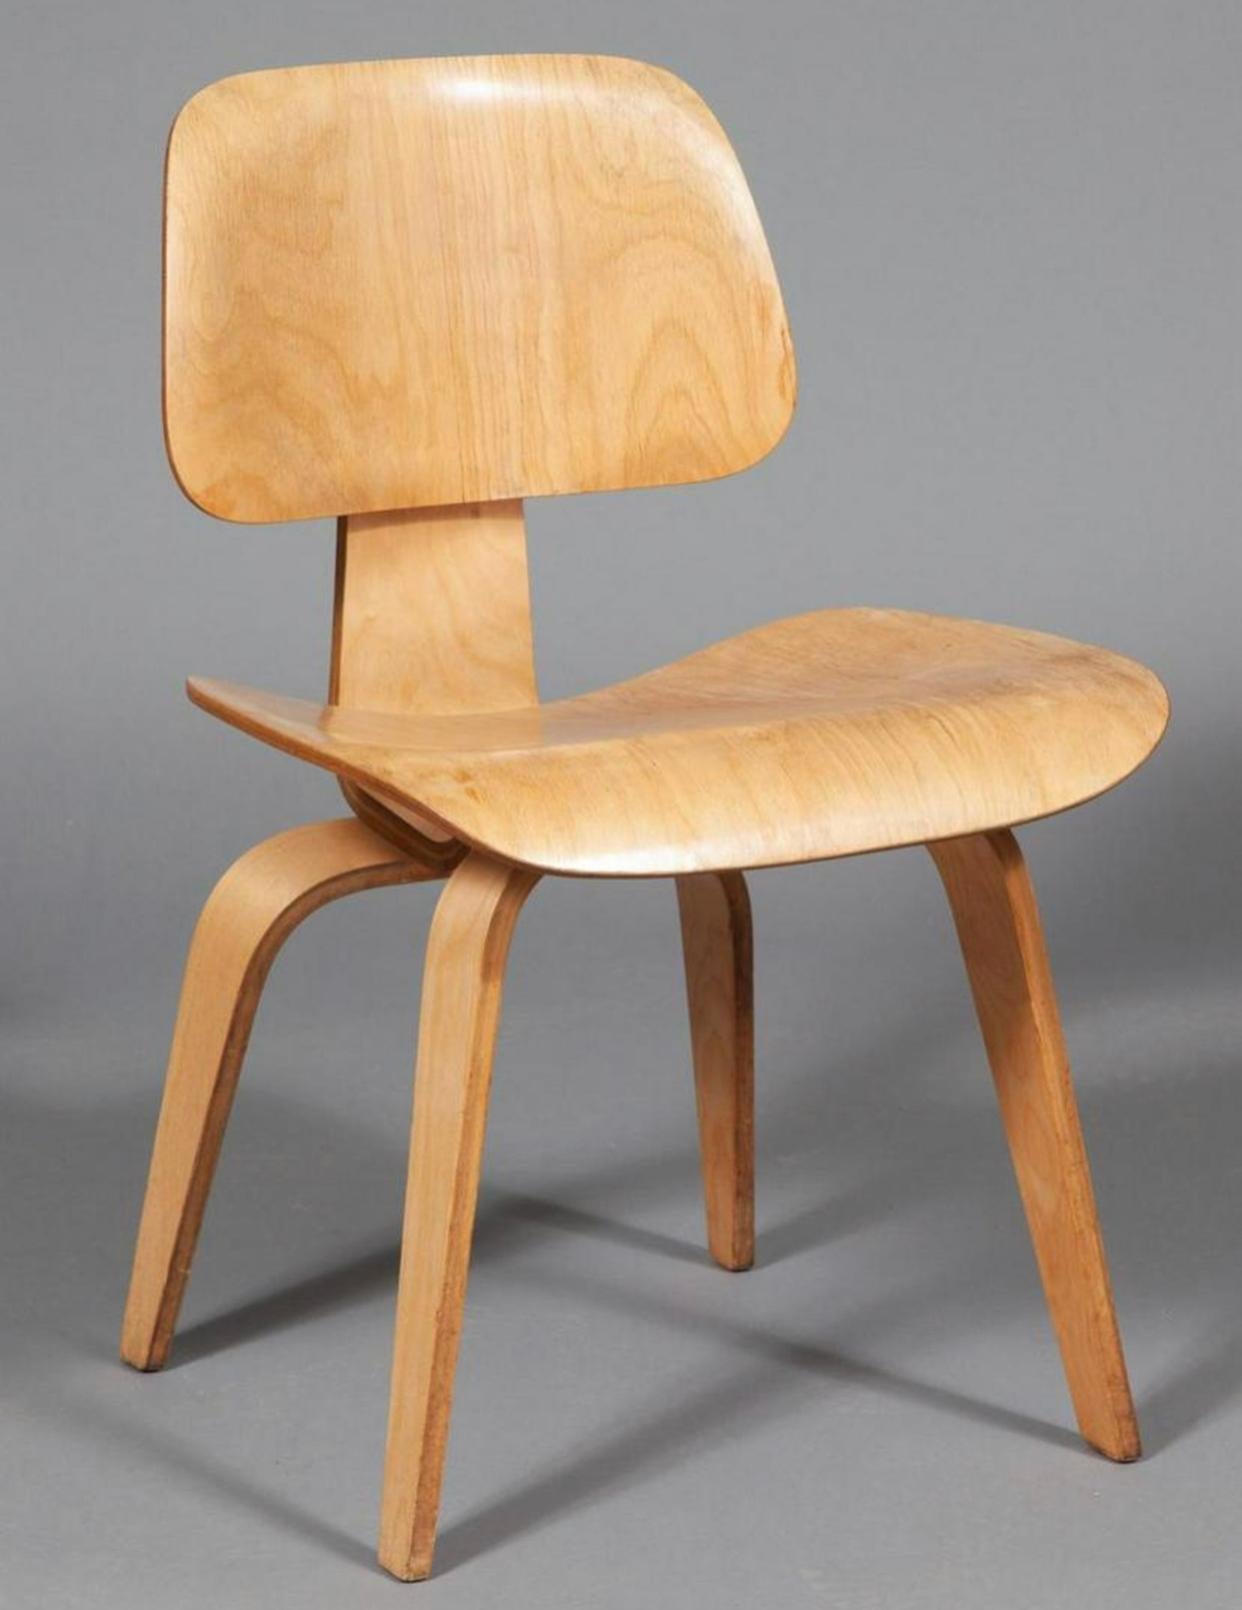 Rare set of four DCW dining chairs designed by Charles and Ray Eames and manufactured by Evans Products. These were produced in the 1940s before Herman Miller took over production. Molded laminated plywood components finished in birch. In original